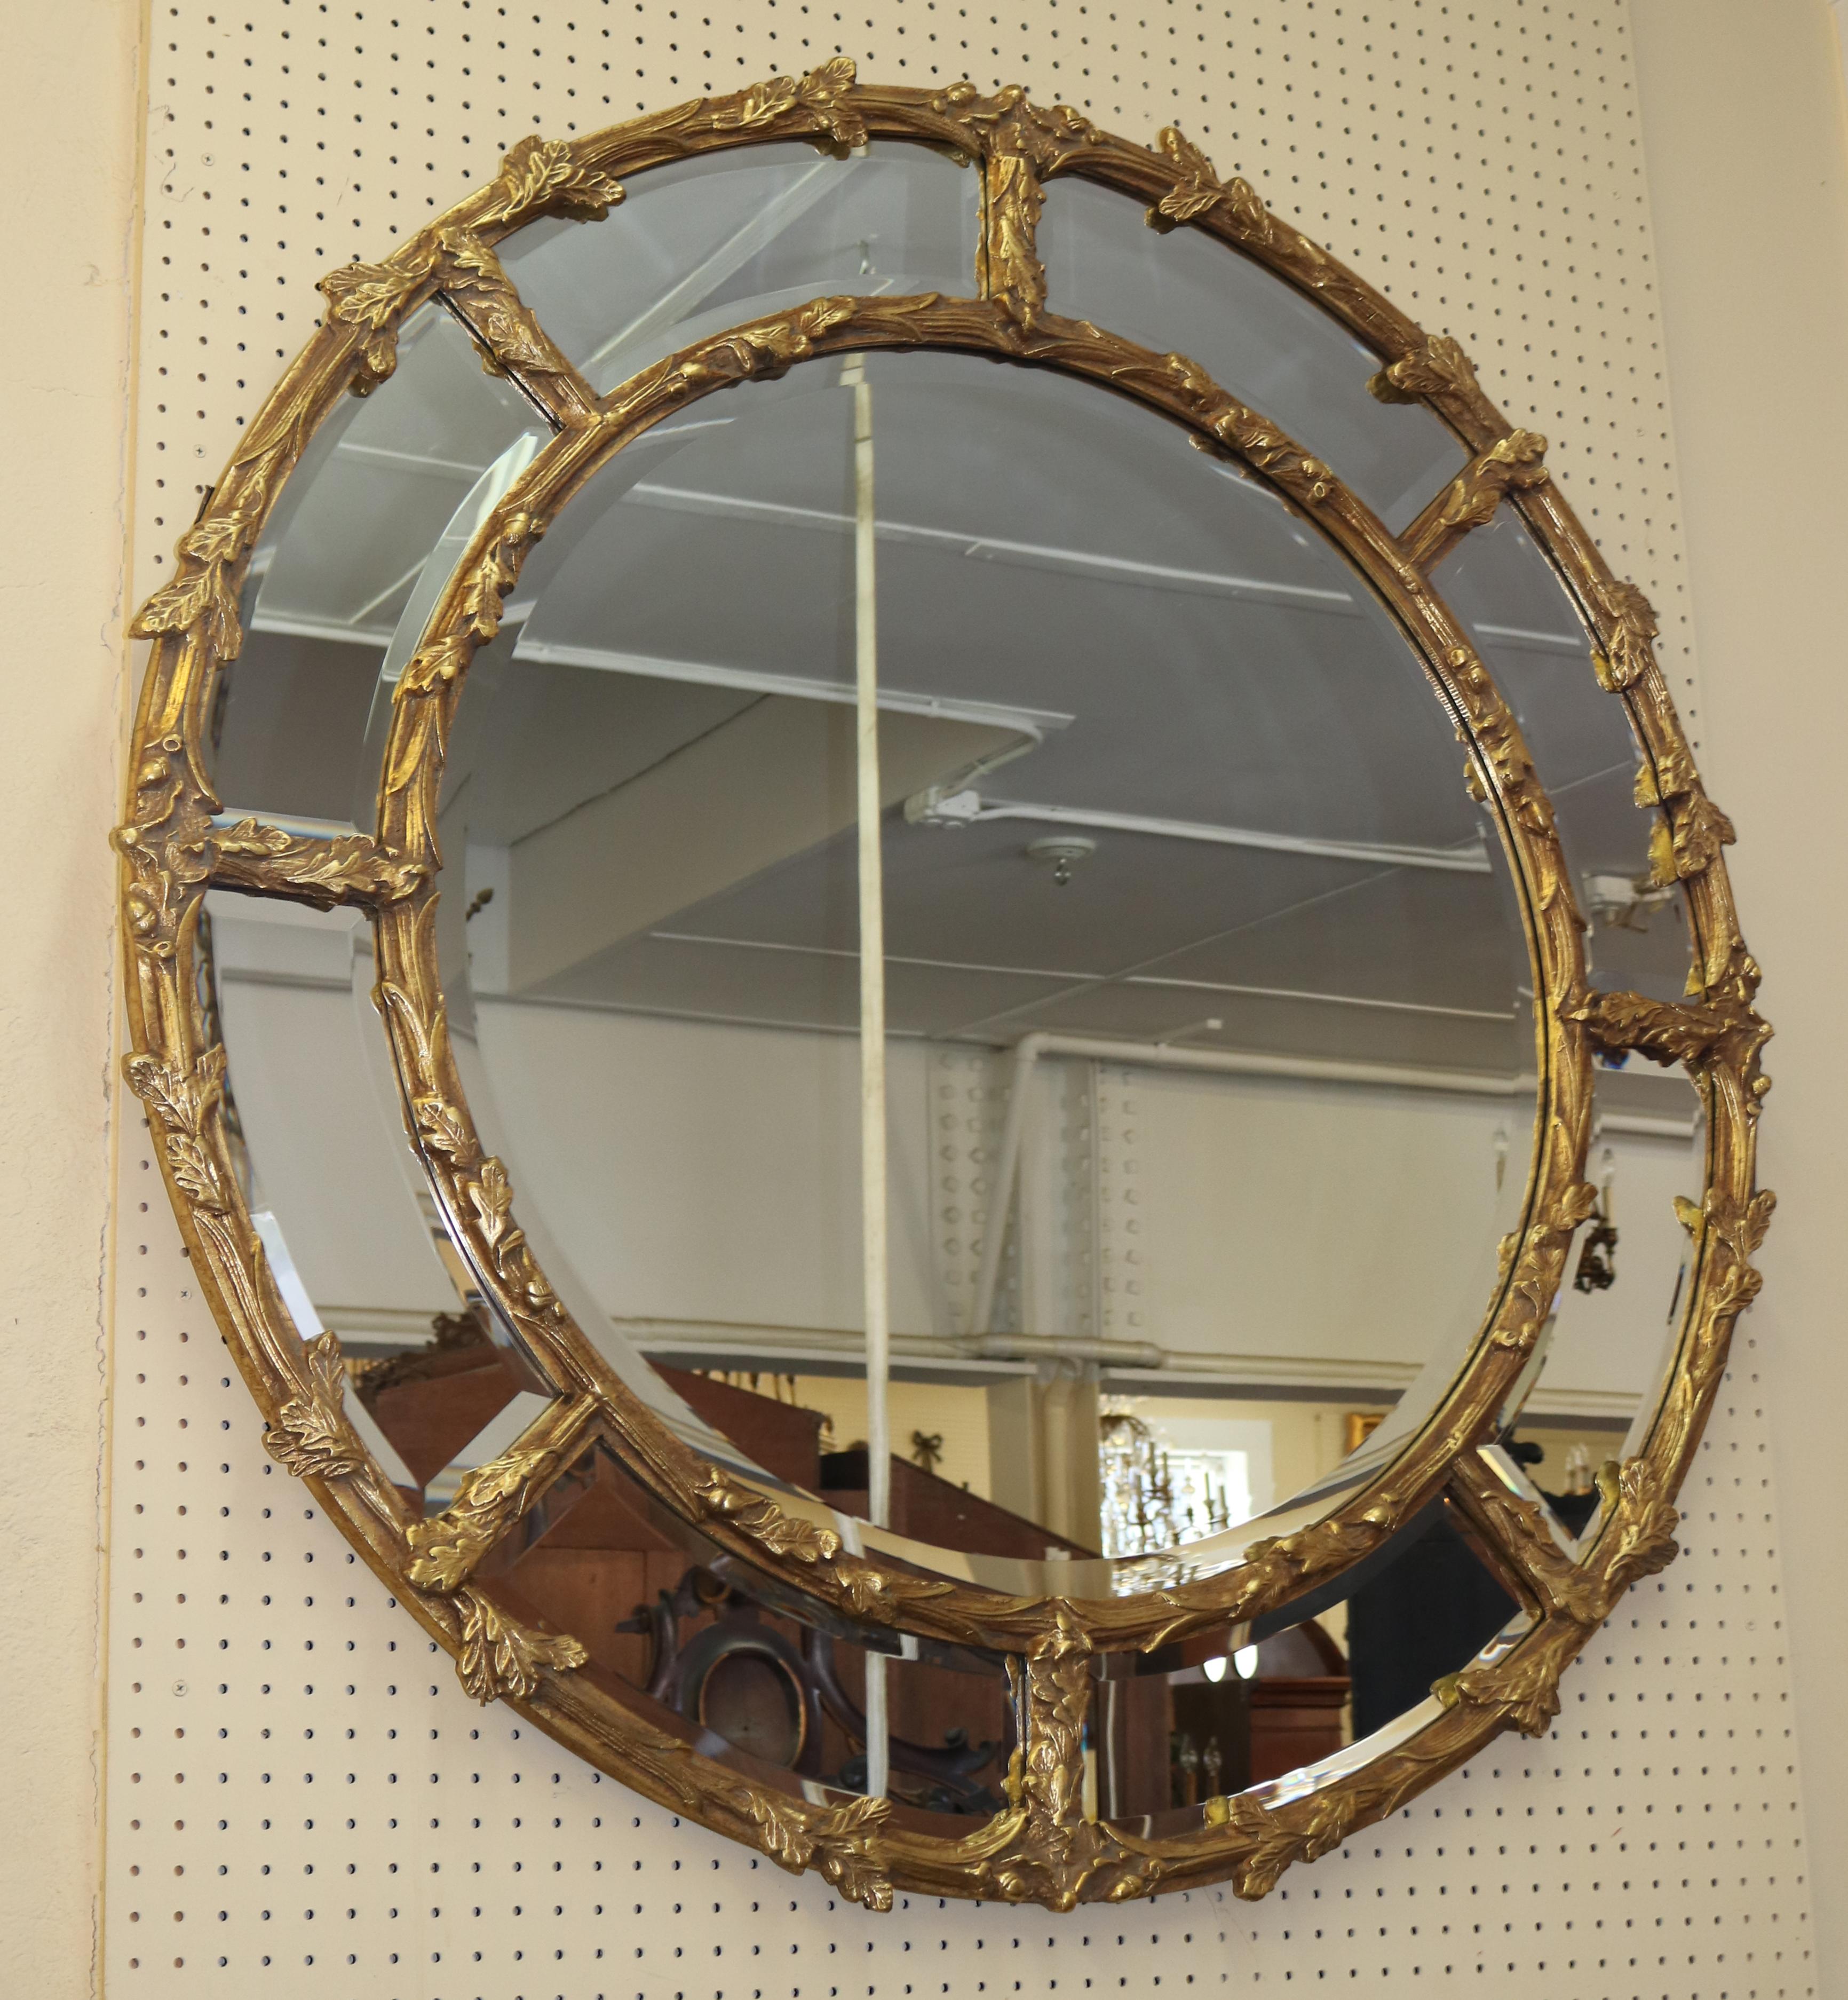 ​Stunning Large Gold Gilt-wood Beveled Round Hanging Mirror

Dimensions : 48 X 48 X 2

This gorgeous gold gilt mirror is stunning the quality of the frame and the bevel of the mirror is top notch. One identical mirror is currently on the market for